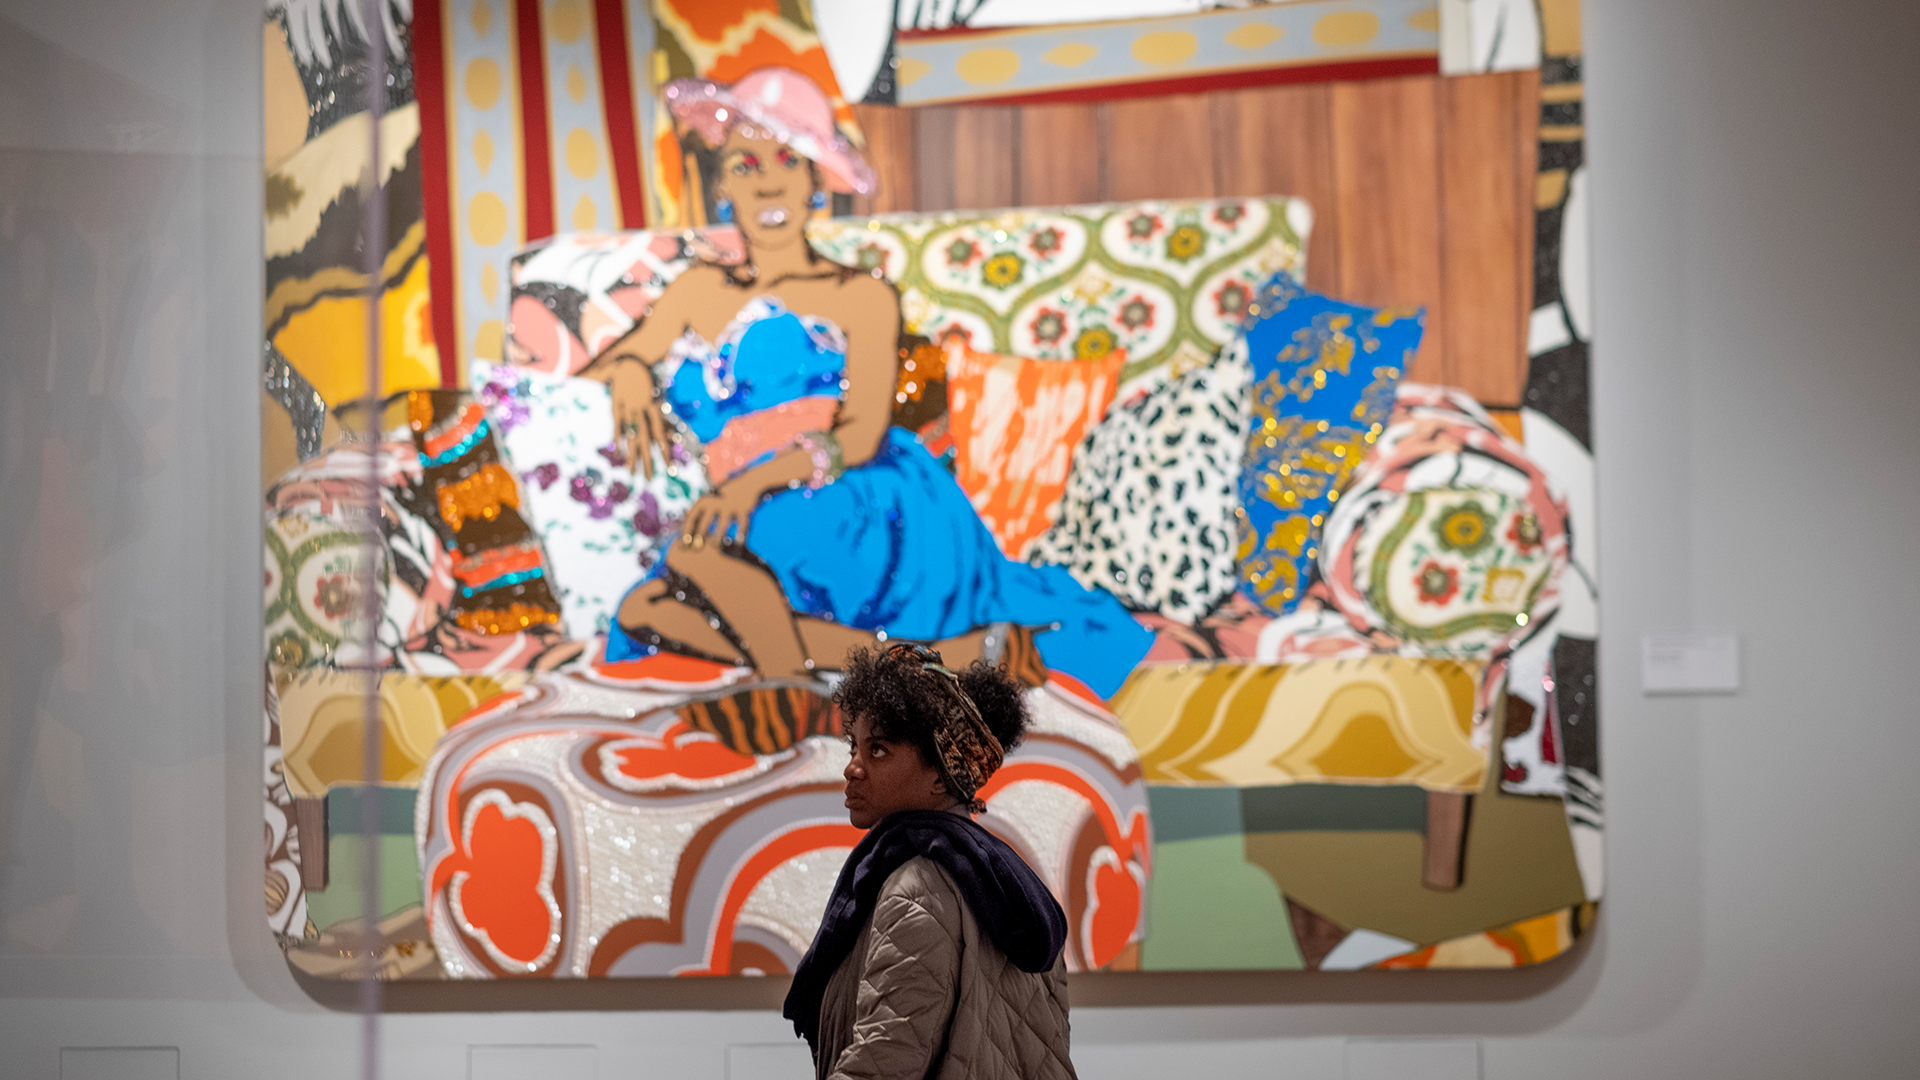 A visitor standing in front of "Something You Can Feel" by Mickalene Thomas